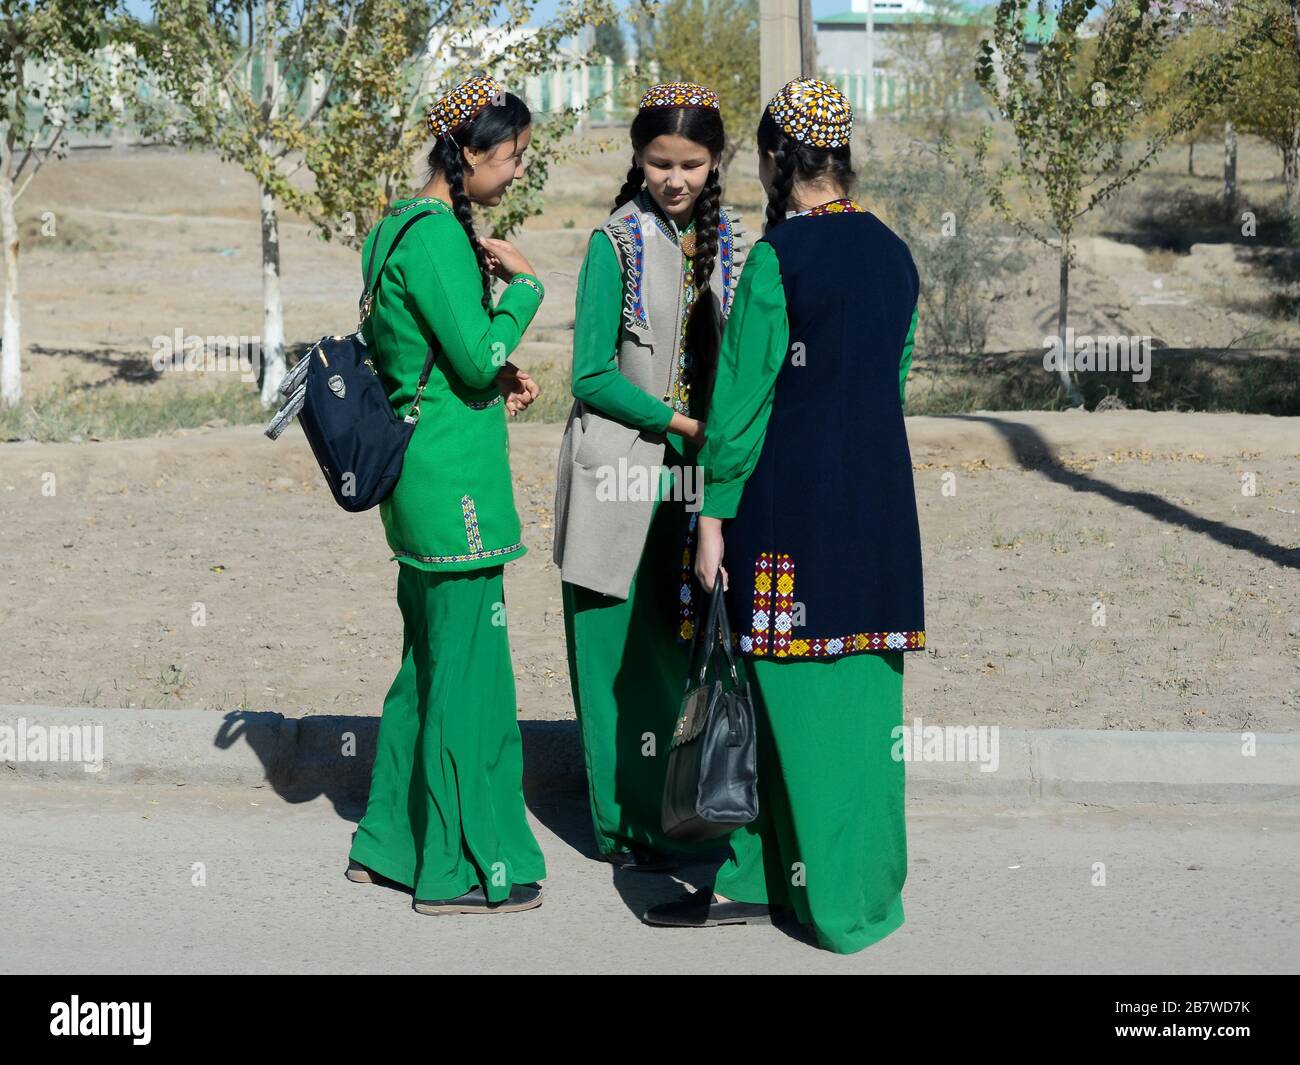 Three student young girls with braids wearing Turkmenistan national dress used as school uniform in Kunya Urgench. Long green dress and tekke hat. Stock Photo